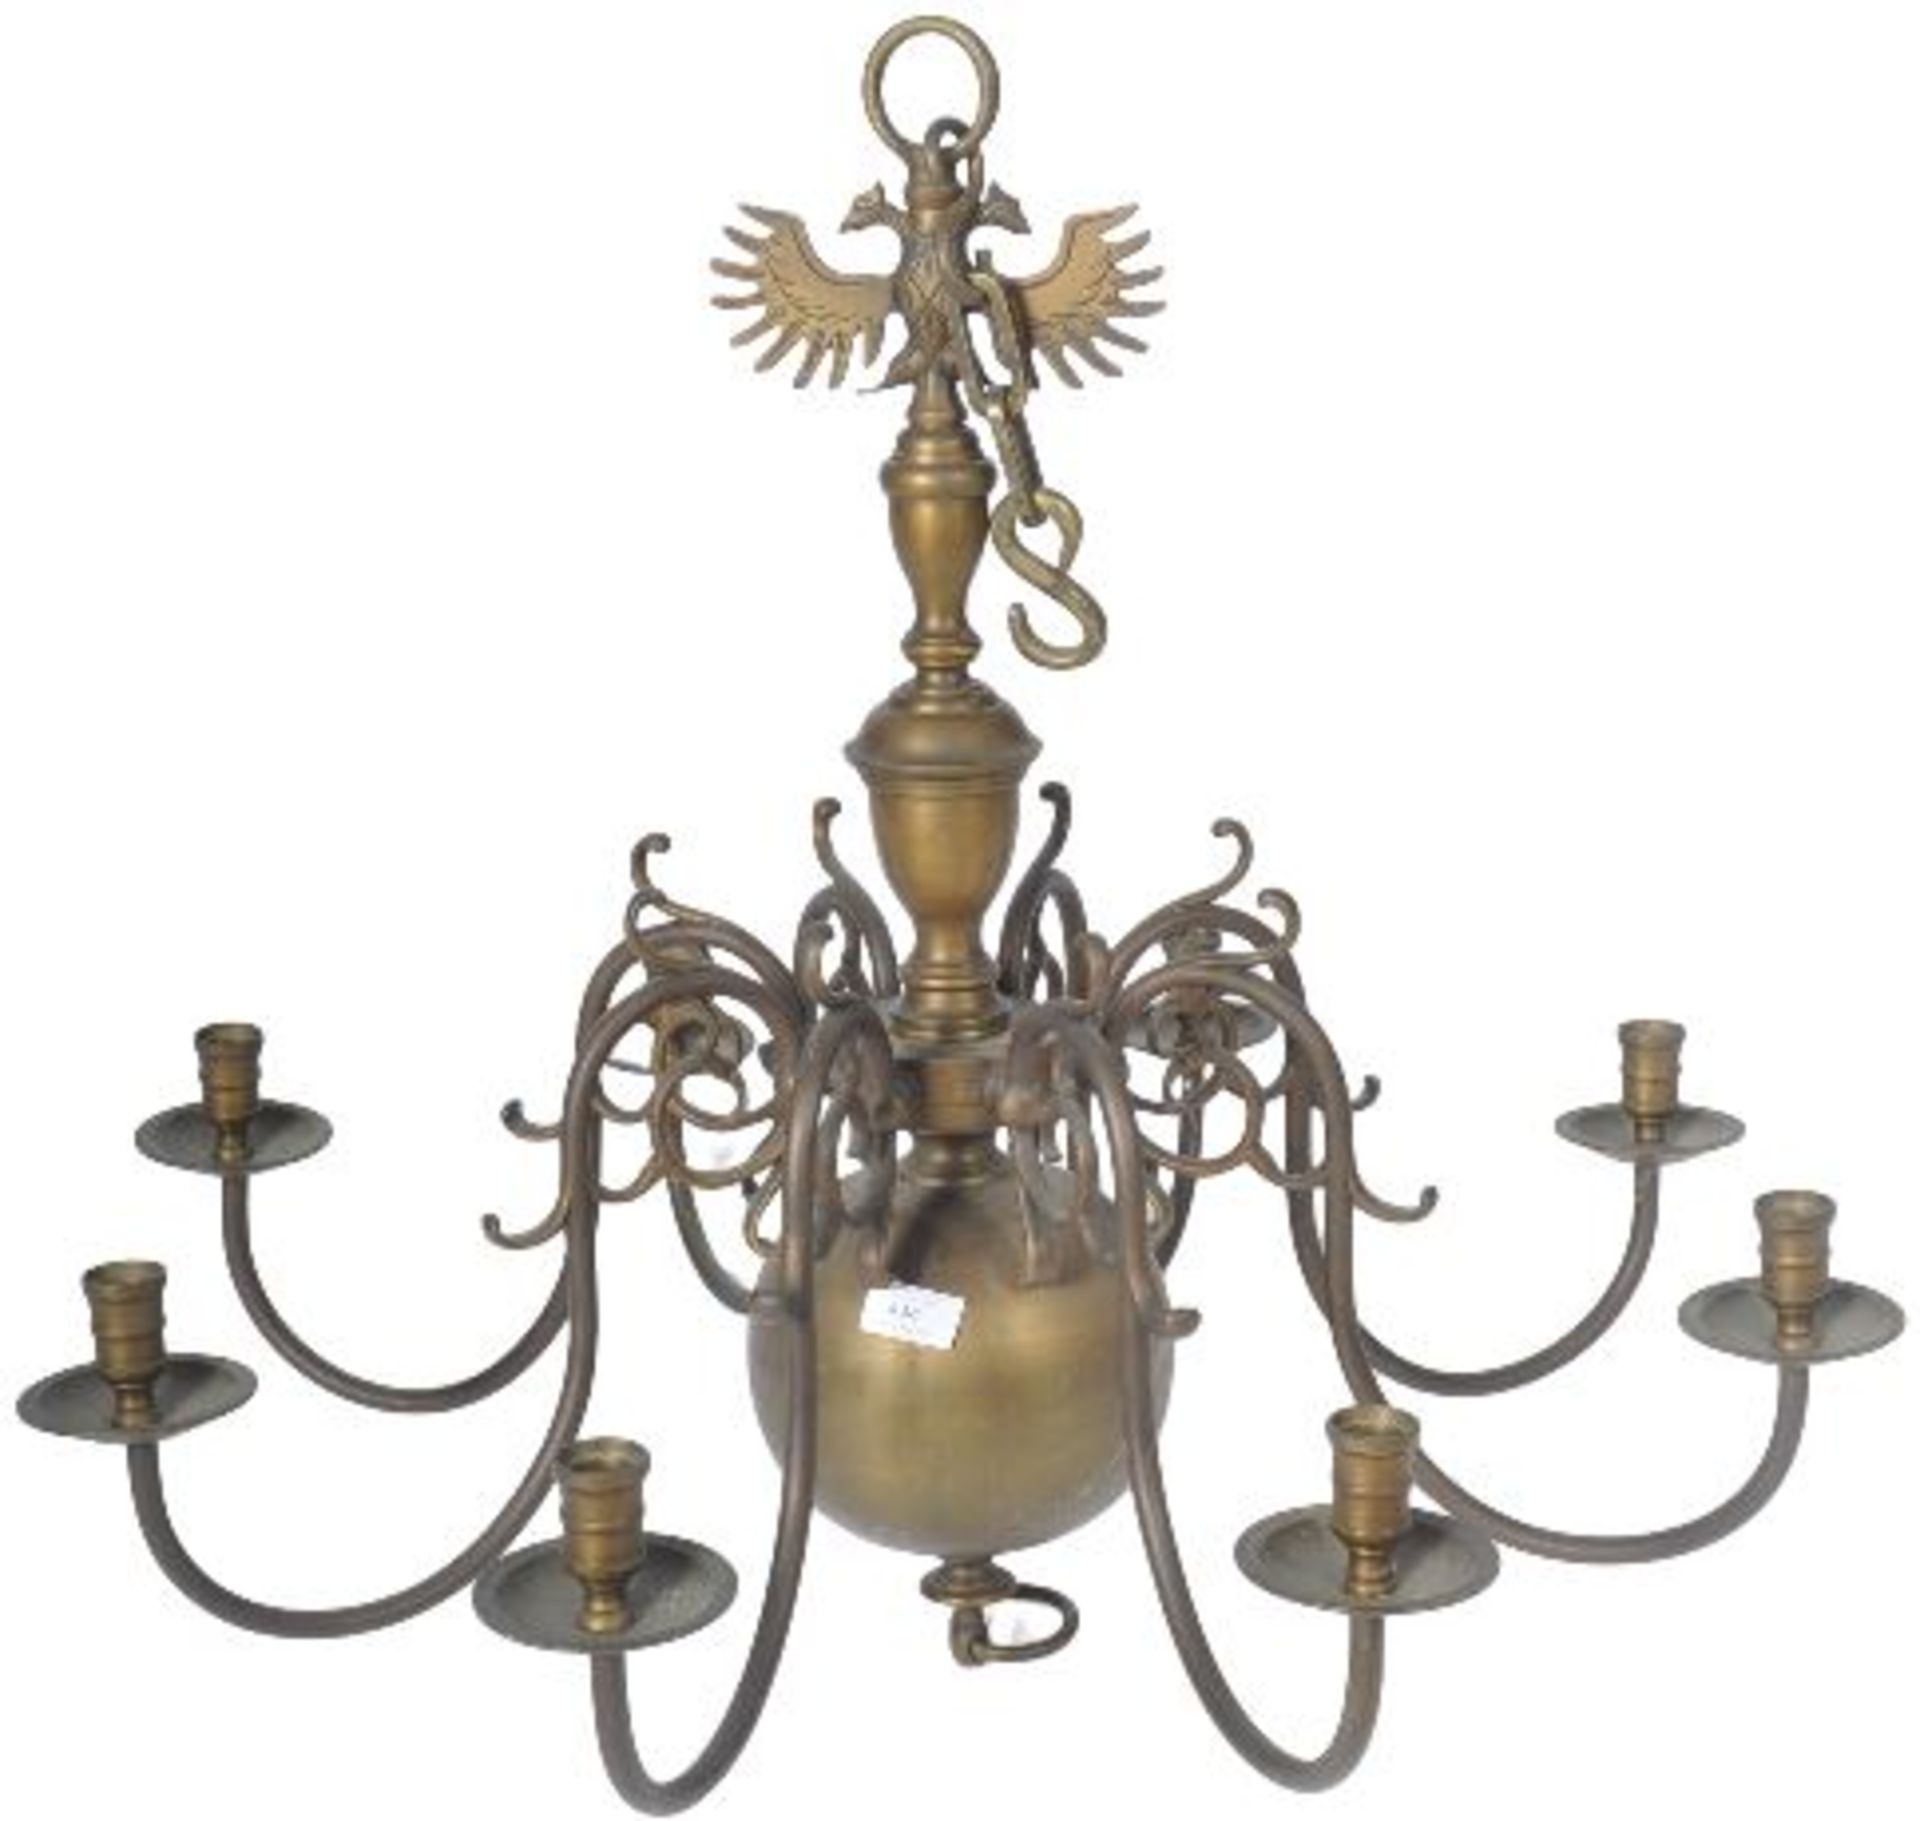 EARLY 20TH CENTURY DUTCH BRASS CEILING LAMP